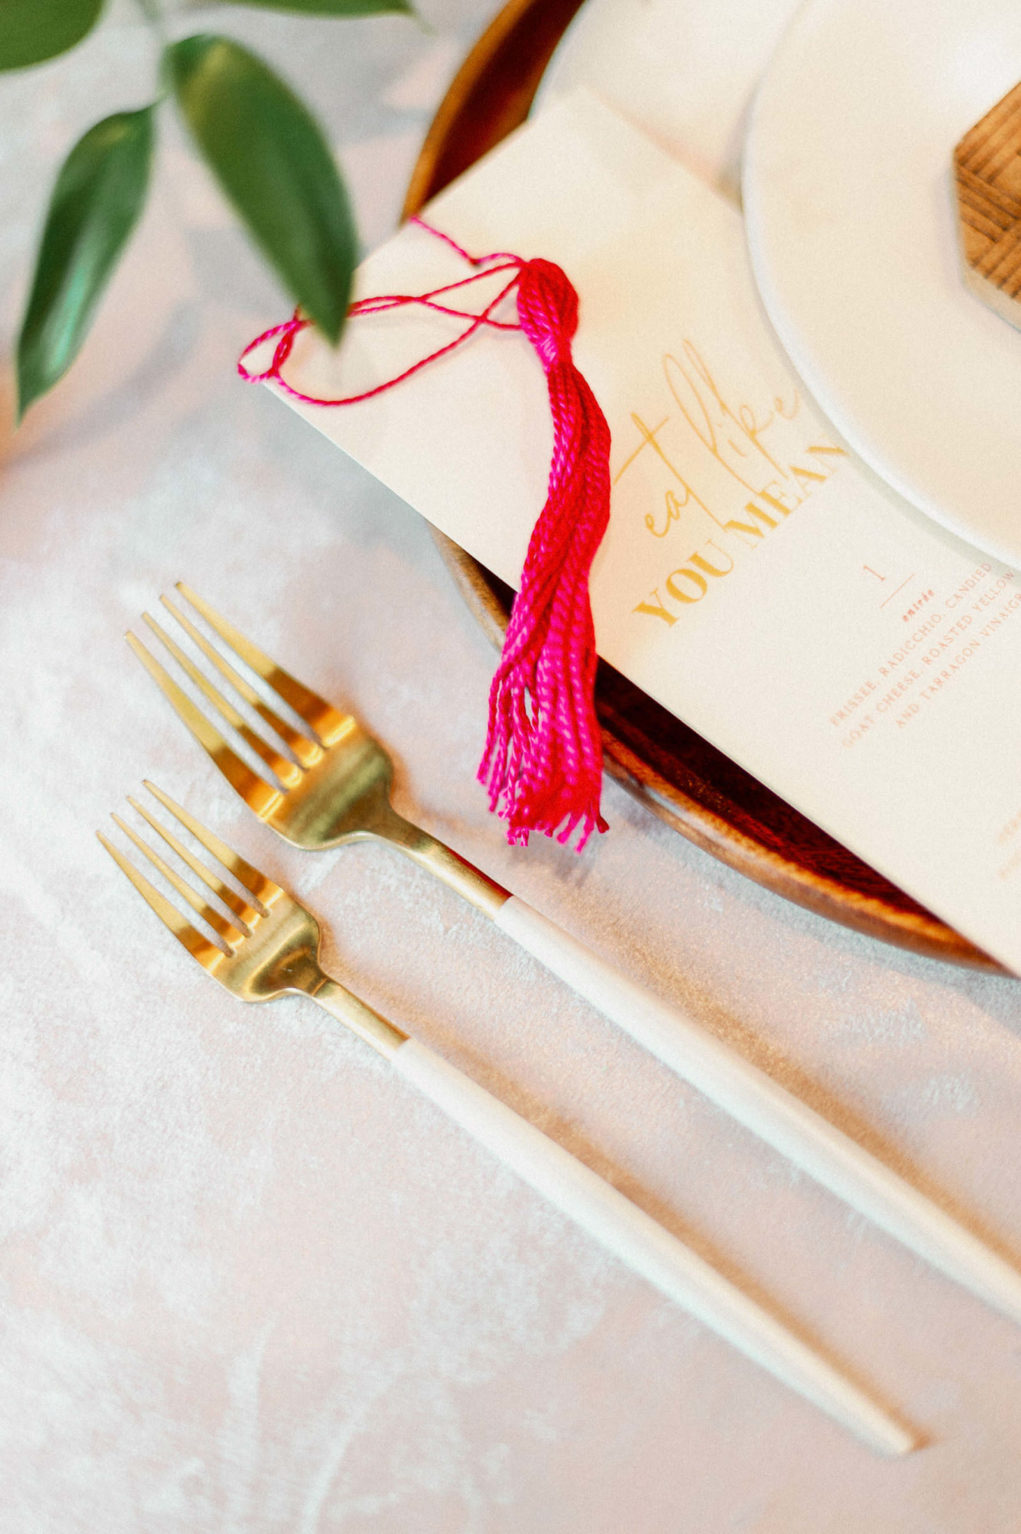 Whimsical and Colorful Wedding Reception Decor, Wooden Charger and Geometric Wood Shape Place Card, Hot Pink Fuschia Tassel, White and Gold Font Menu, White and Gold Modern Flatware | Tampa Bay Wedding Photographer Dewitt for Love | Linen Rentals Kate Ryan Event Rentals